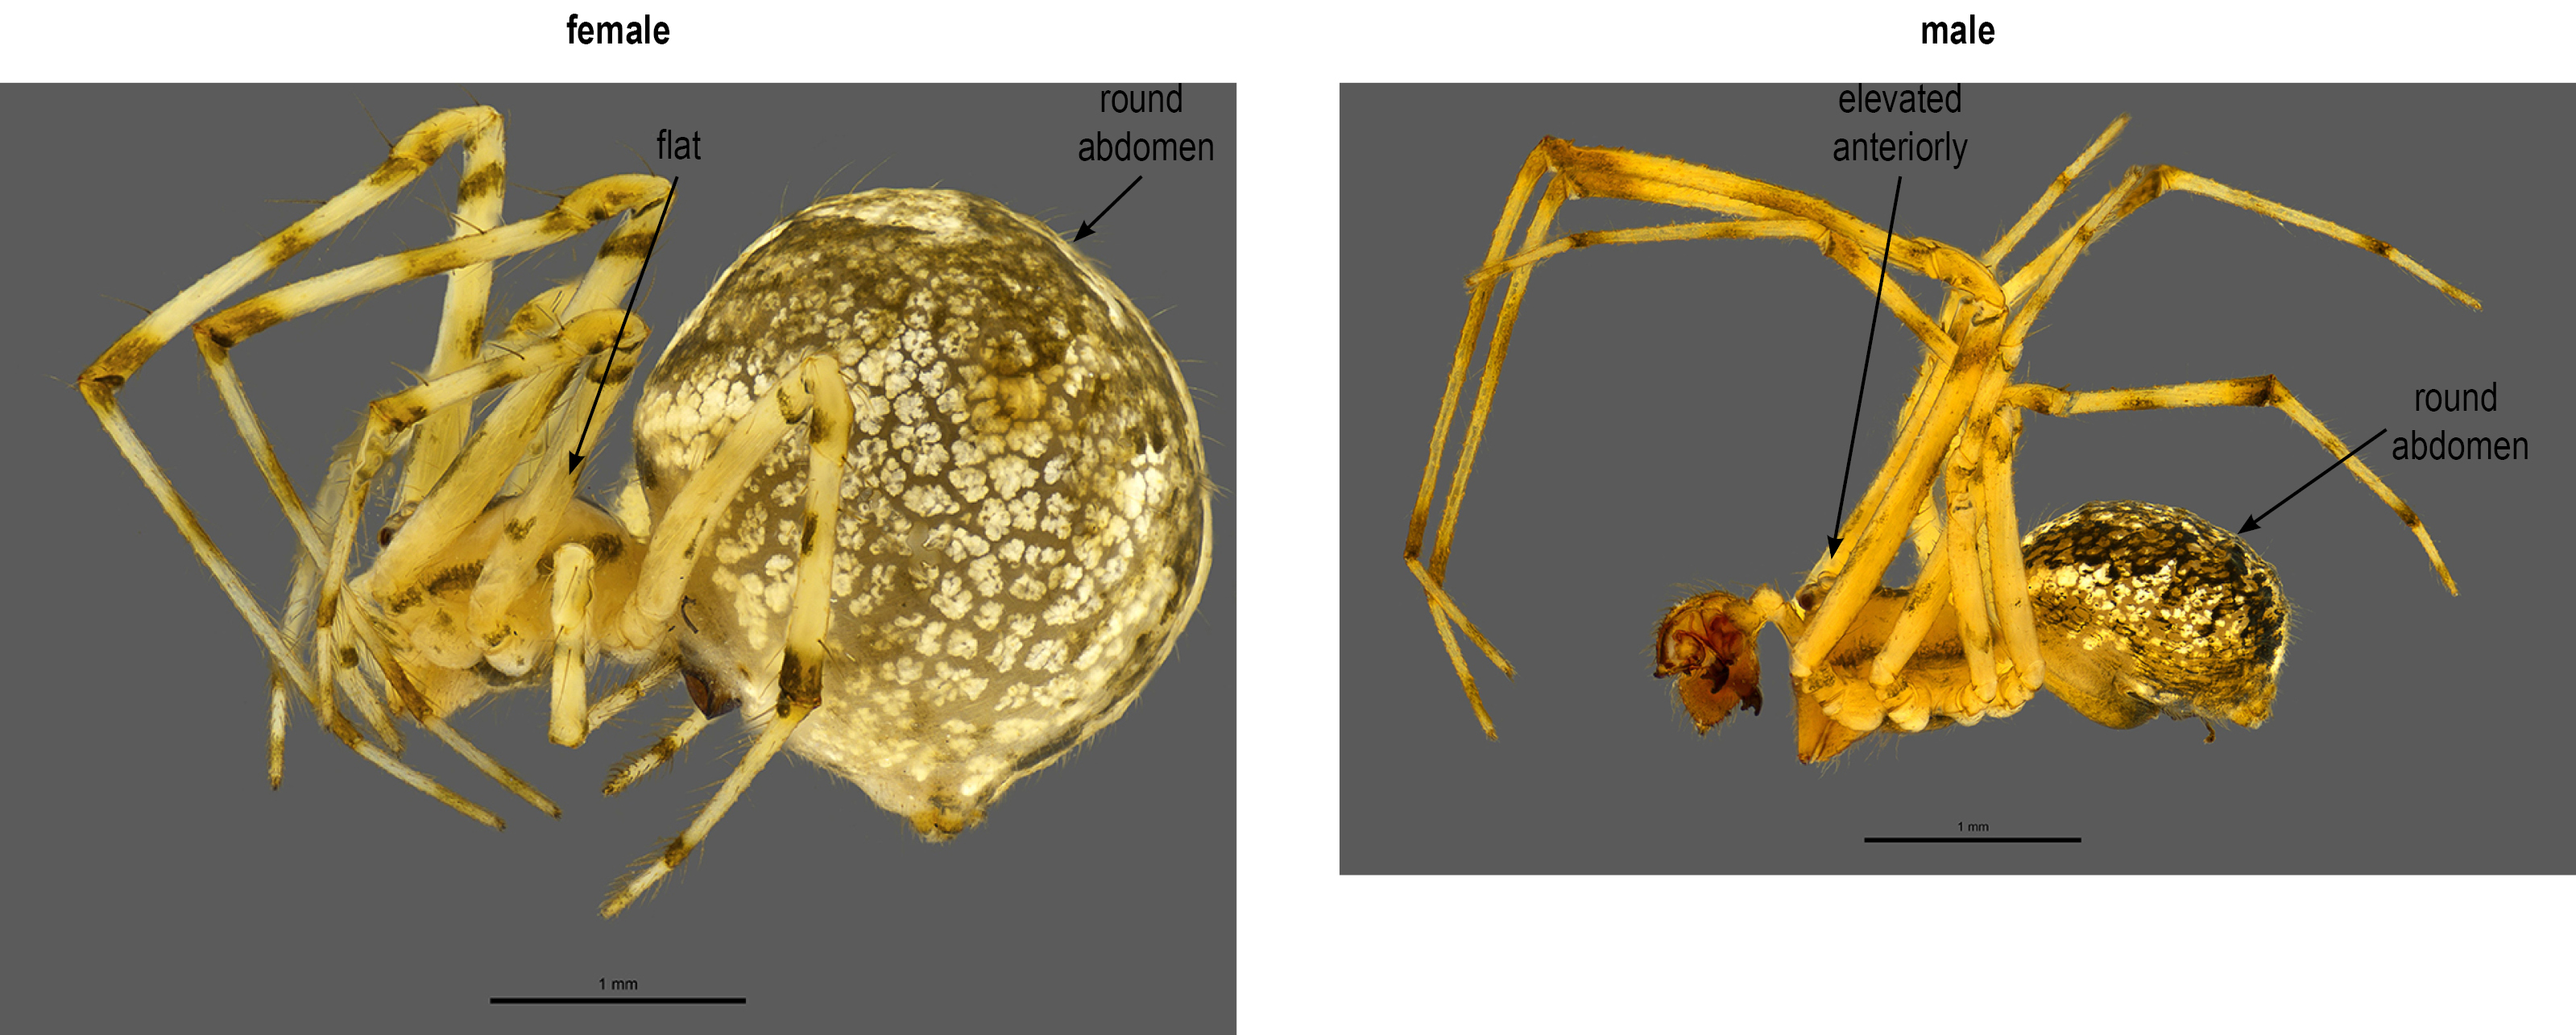 Theridion varians